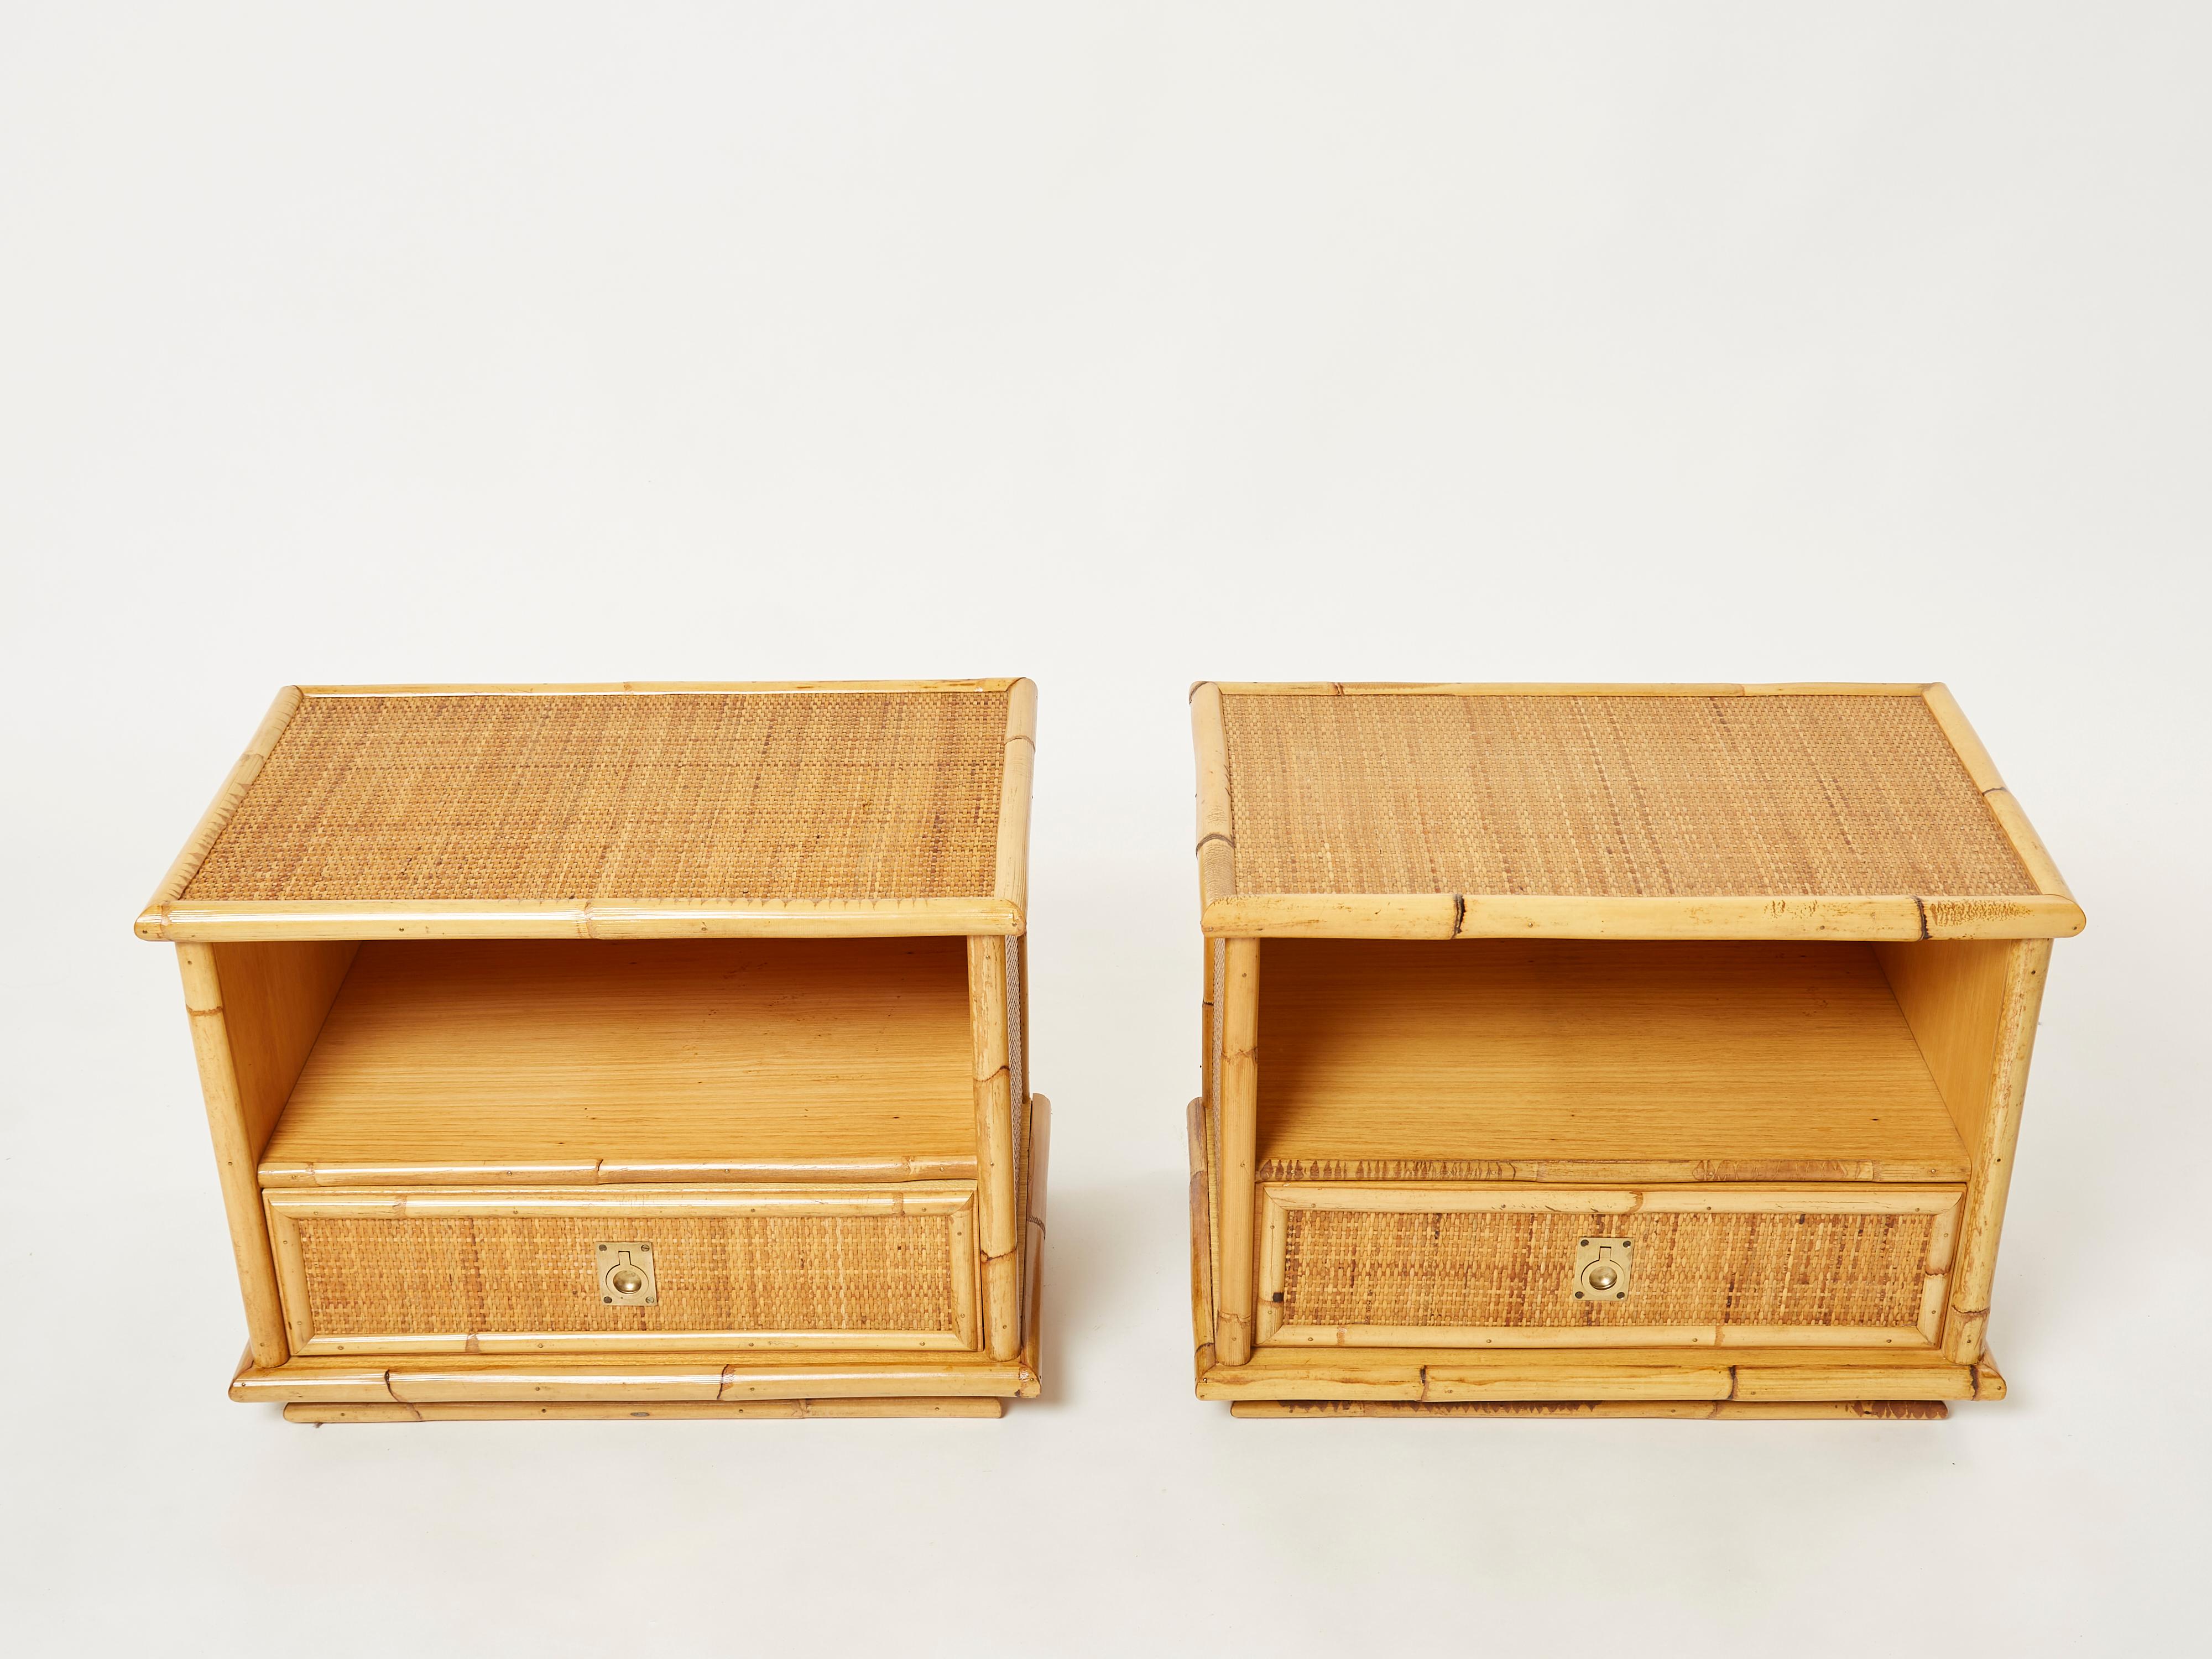 Natural bamboo as the chief material creates a summery, organic aesthetic in these 1970’s night stands, or end tables, while bright brass handles are strong, adding eye-catching touches. The brass handles on the drawers are lovely examples of